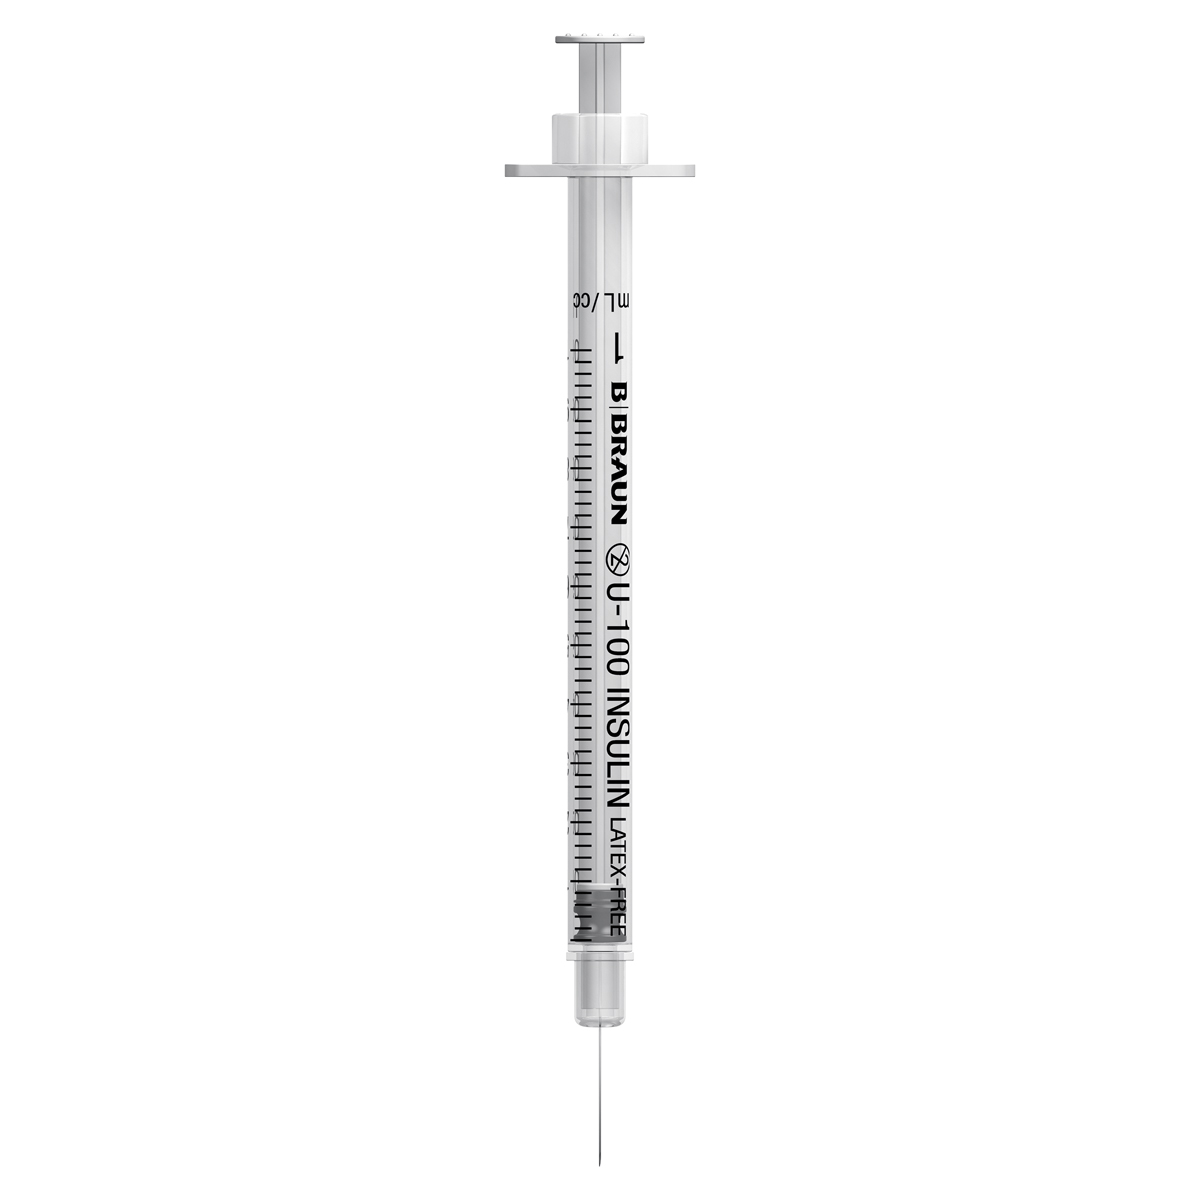 BBraun Omnican 1ml 30G insulin syringe (ind blister packed)